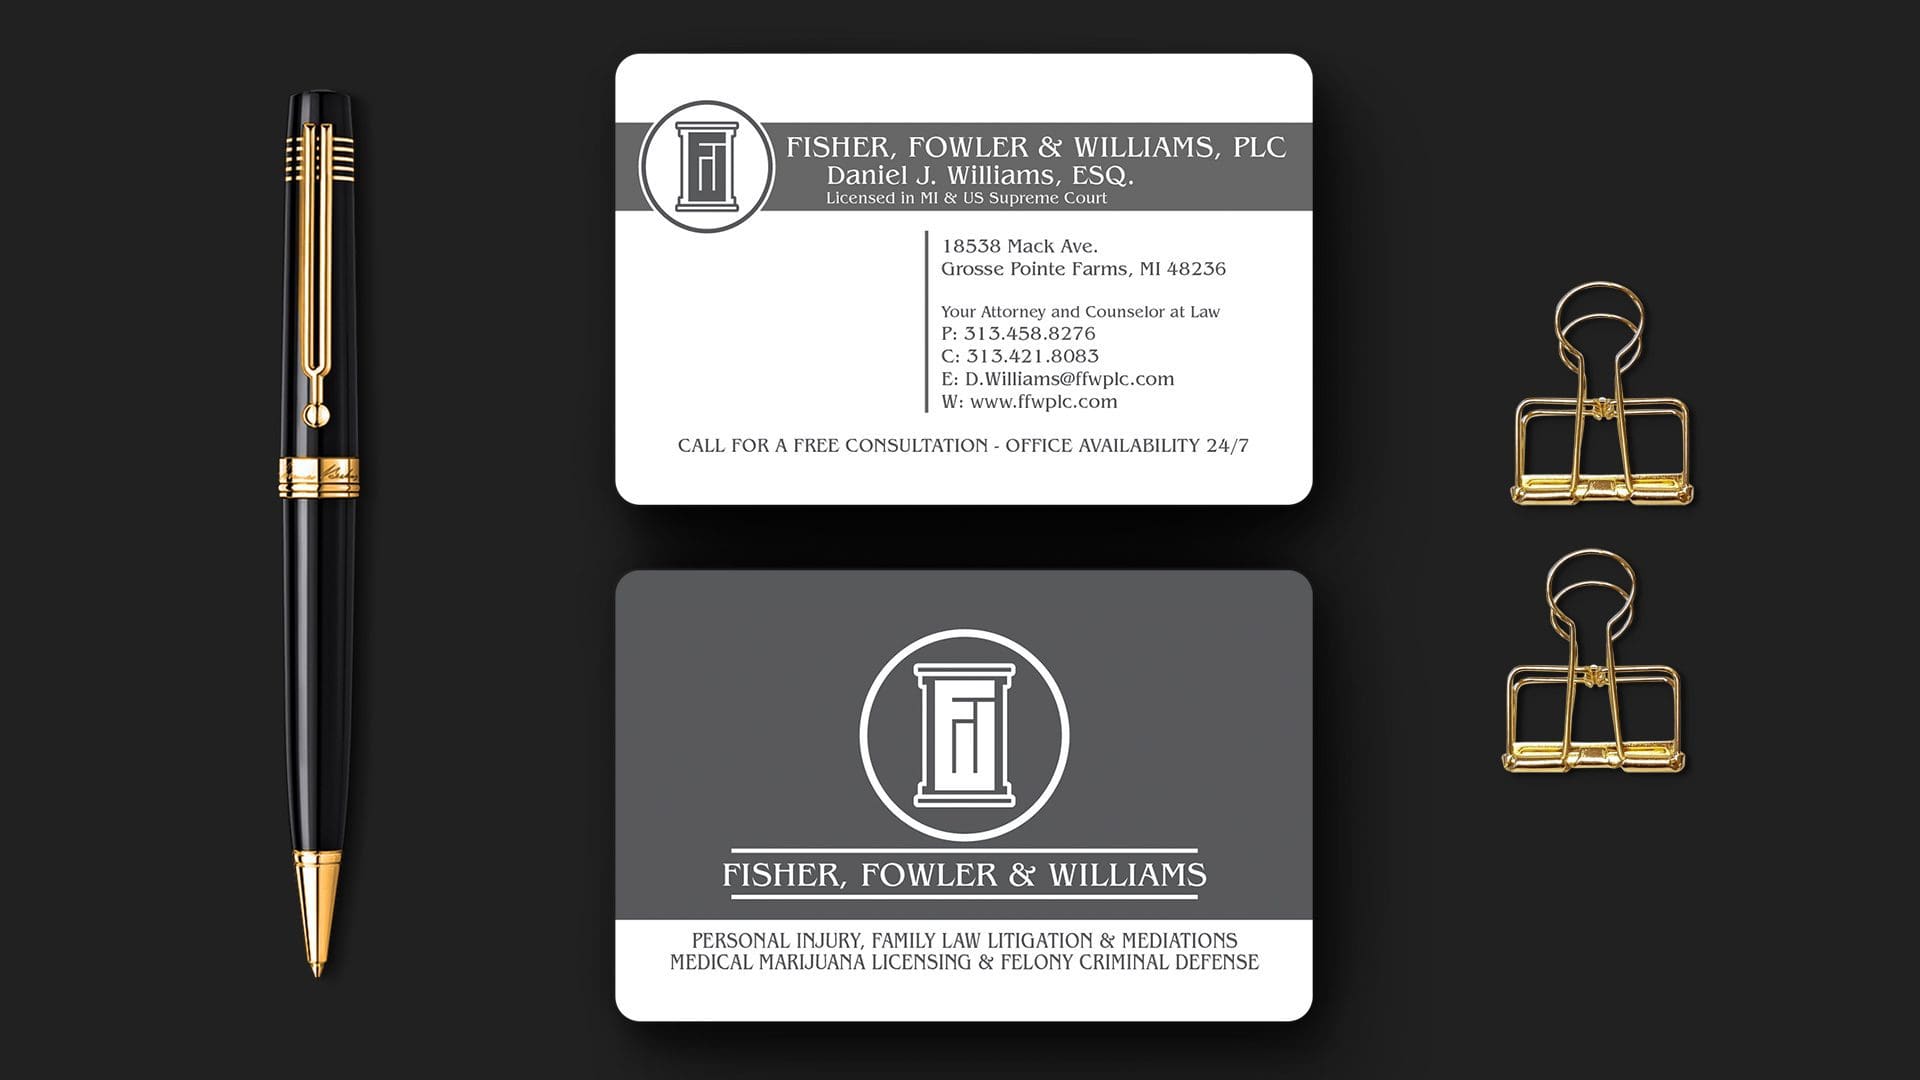 Fowler and Williams – Matte Business Card with Rounded Corners Mockup 02